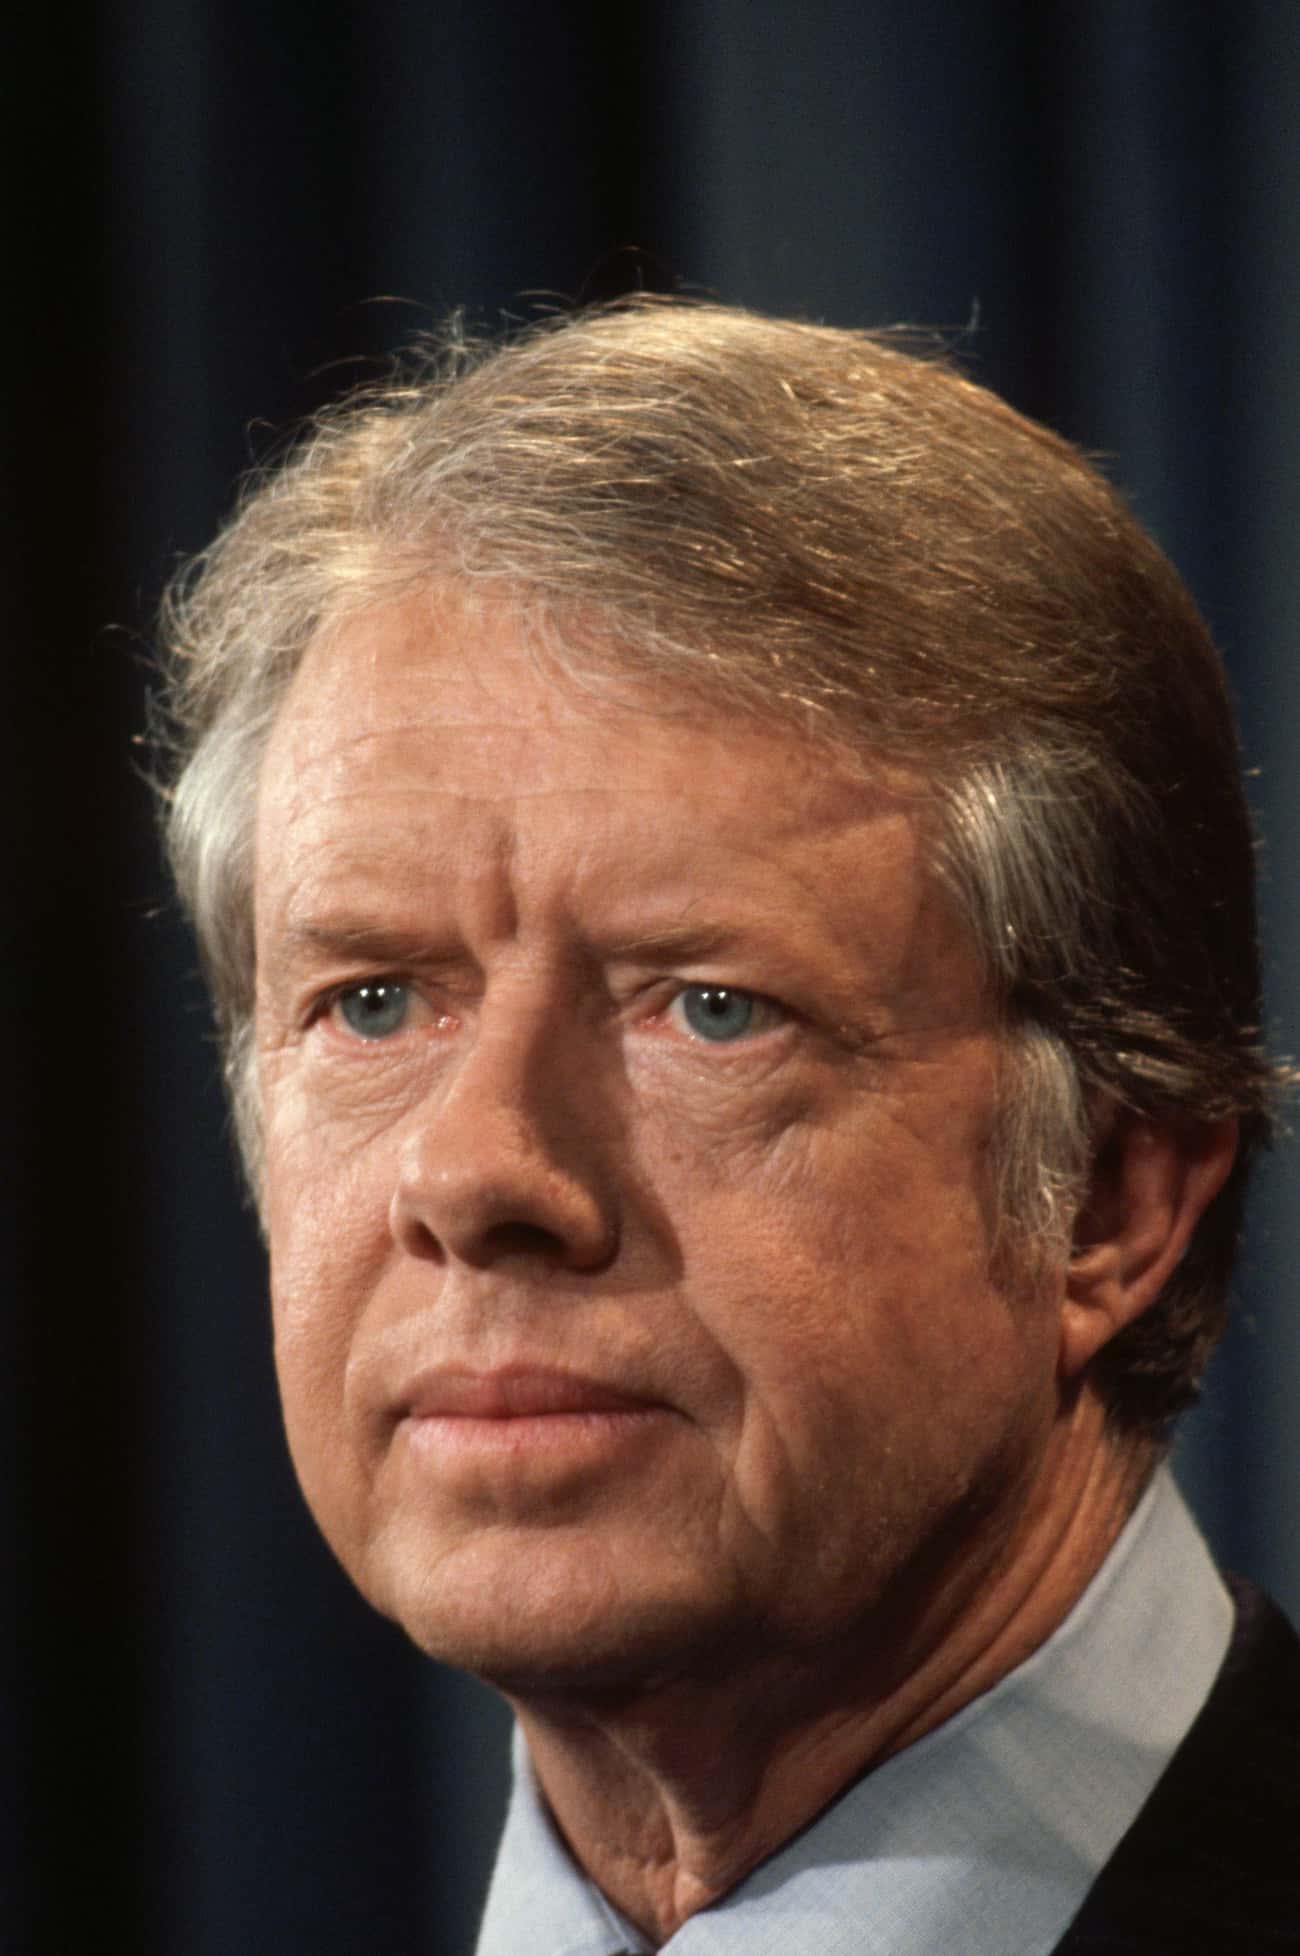 Jimmy Carter Claims To Have Seen A UFO